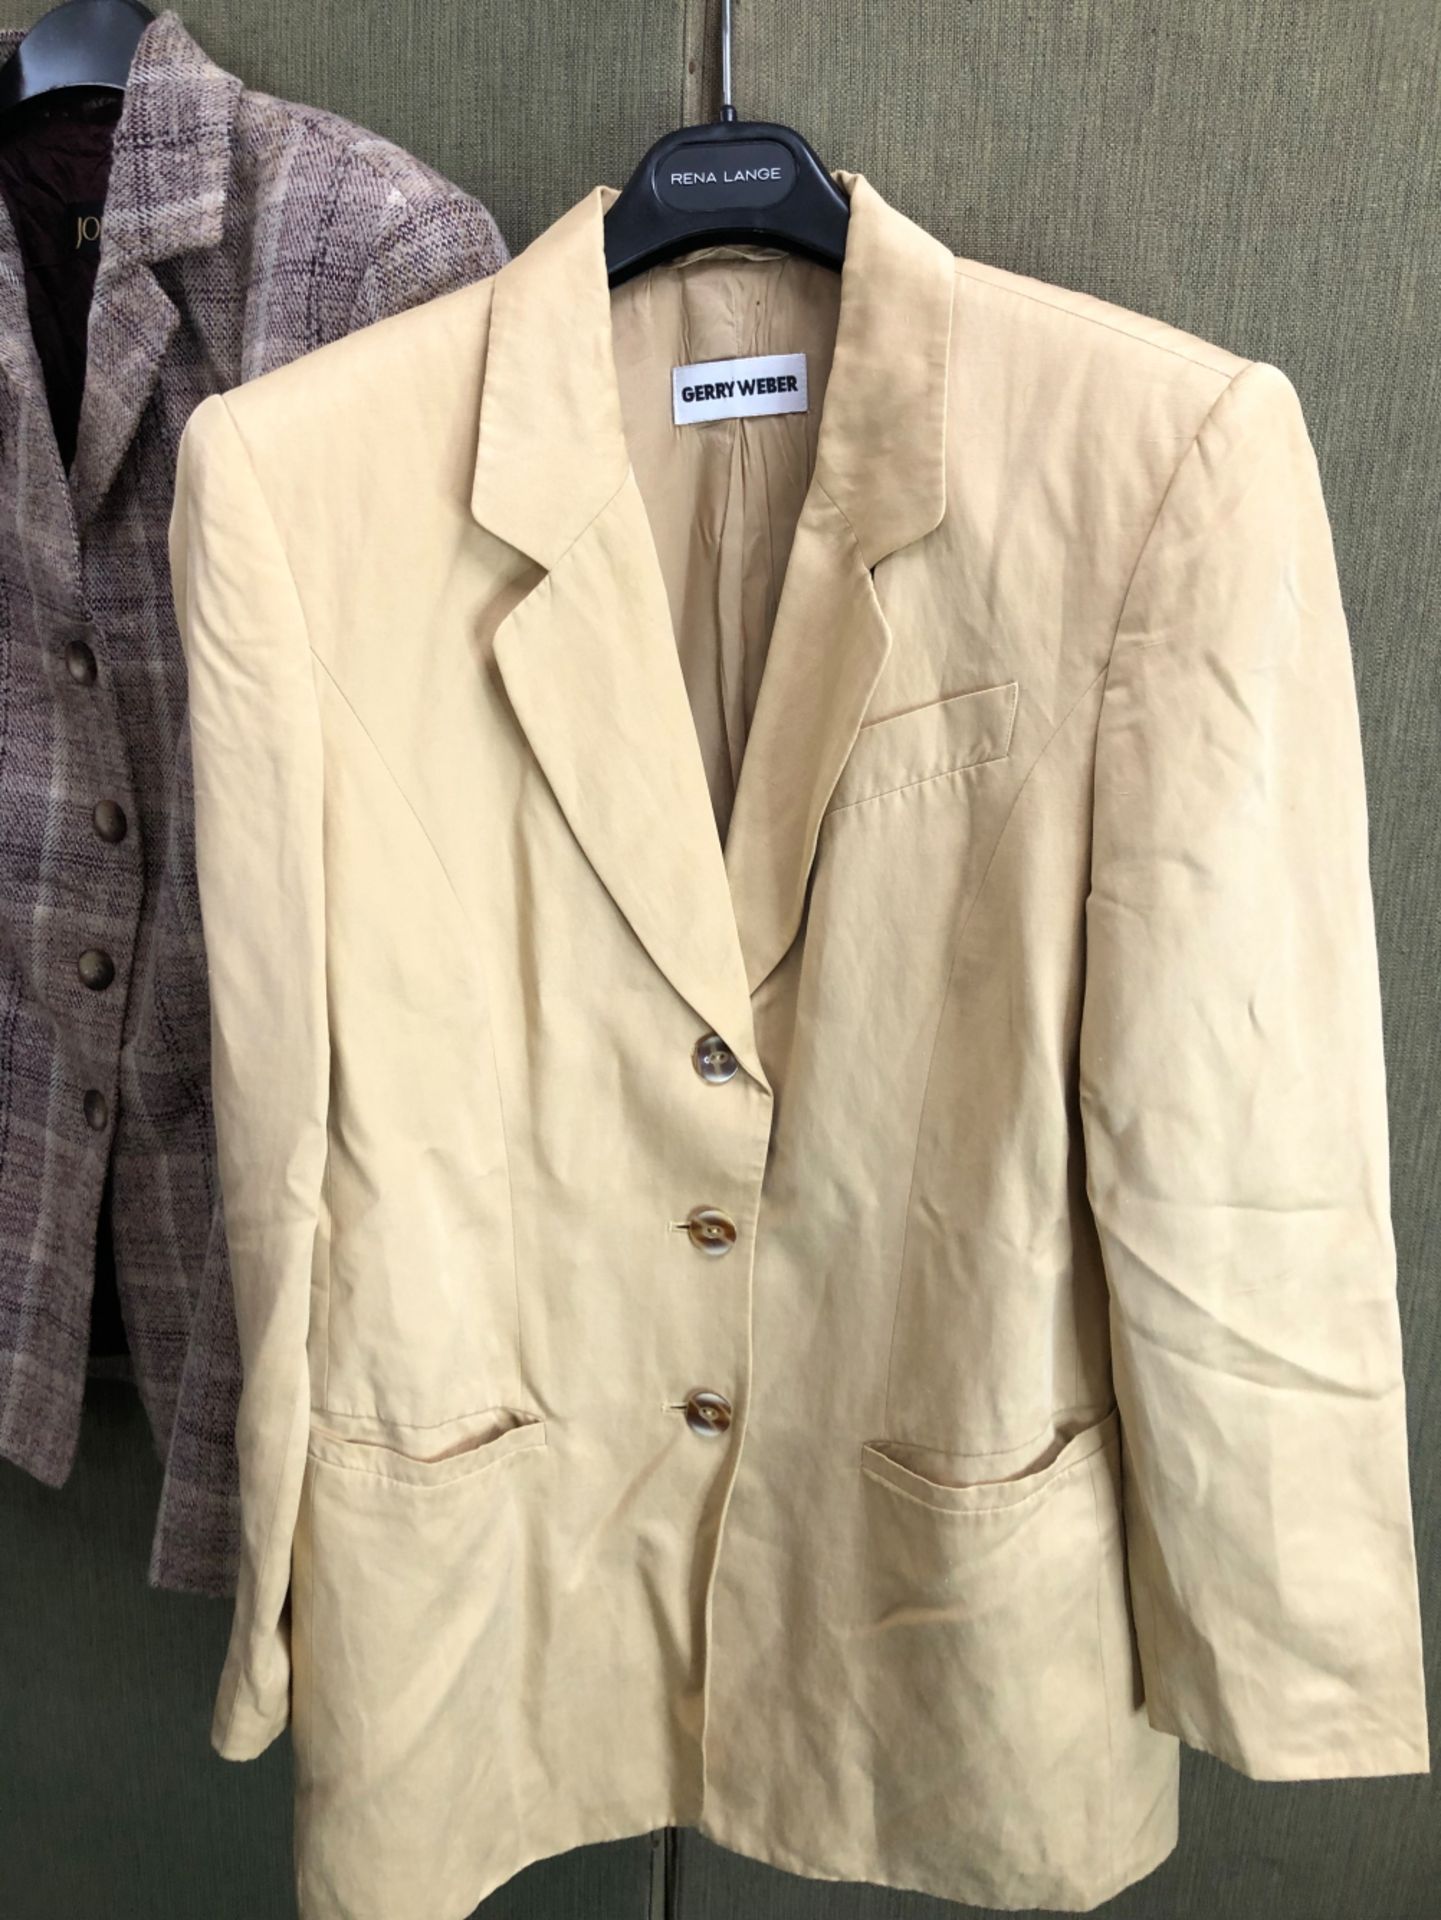 A GERRY WEBER PALE YELLOW SILK AND LINEN BLEND JACKET, SIZE ON TAG 36, TWO JOBIS CHECK PATTERN - Bild 2 aus 11